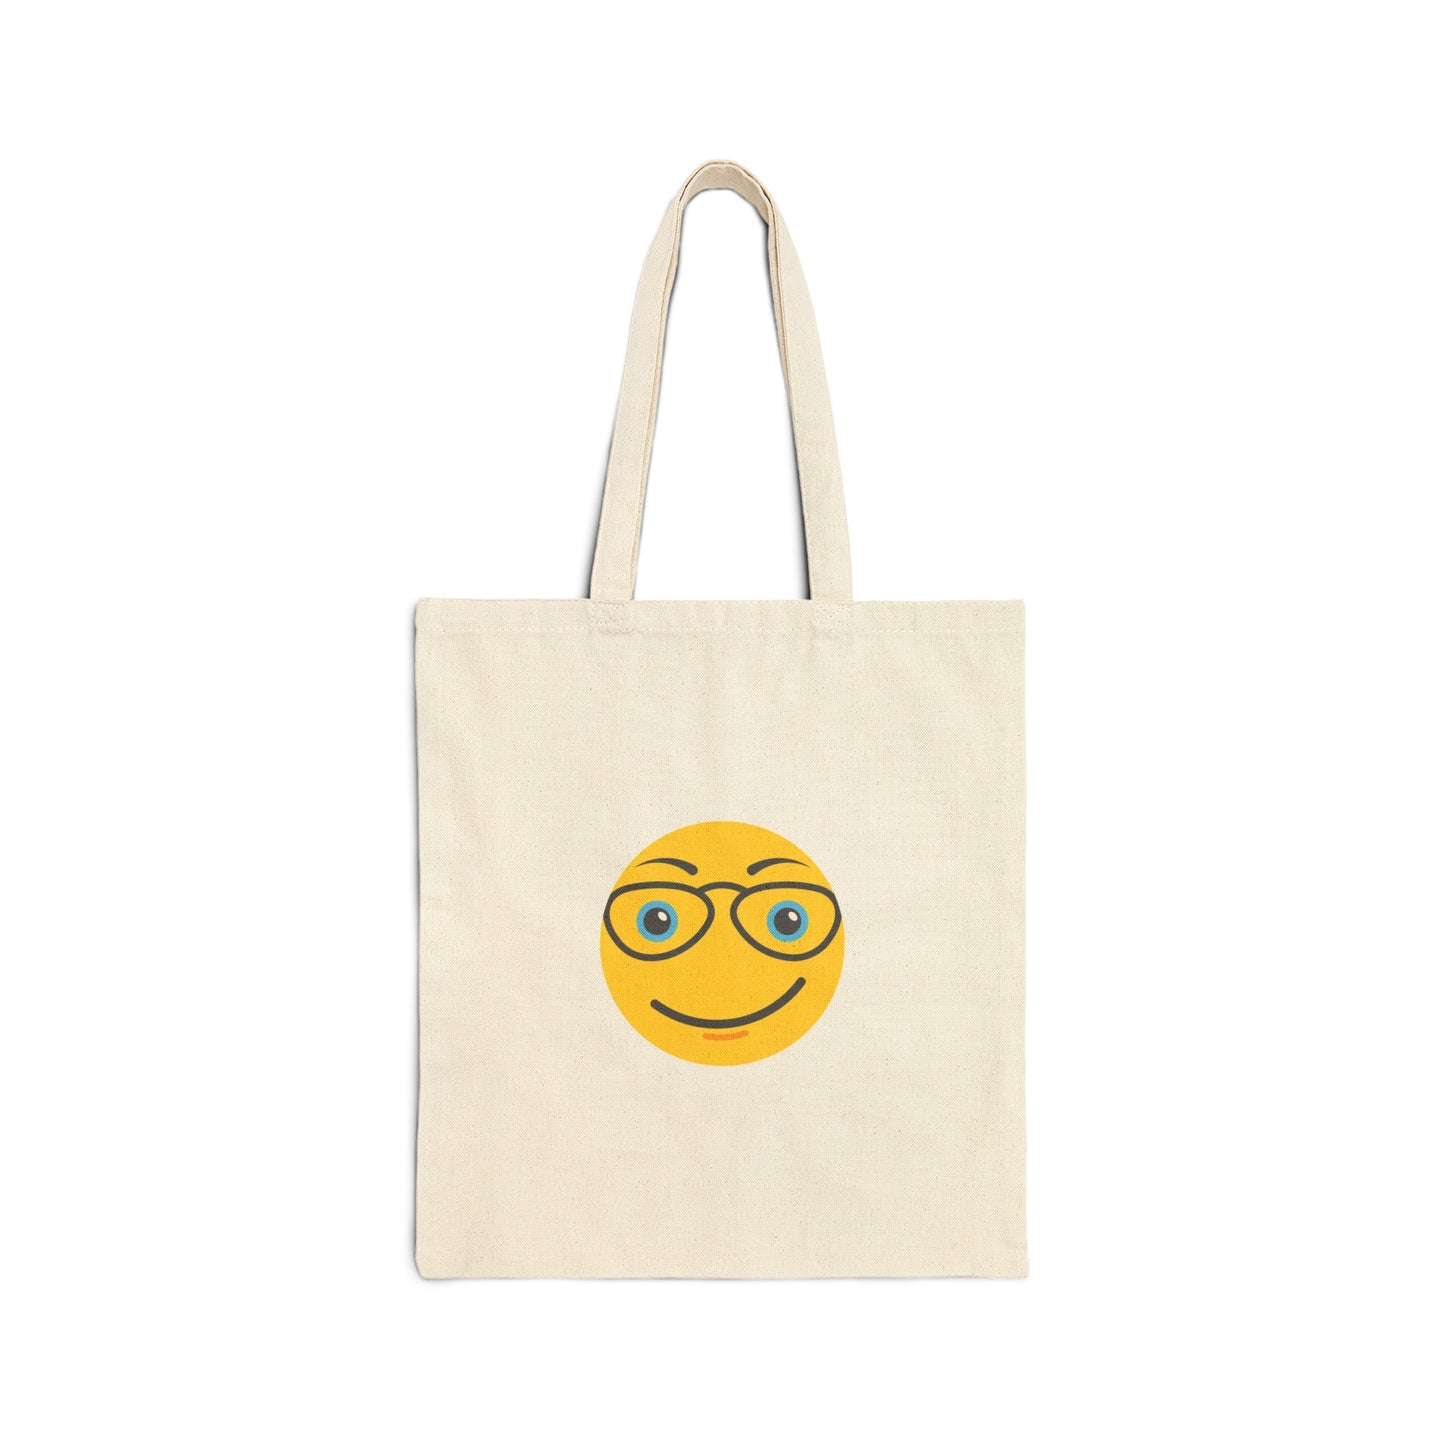 Cotton Canvas Tote Bag: Smiley Face with Glasses